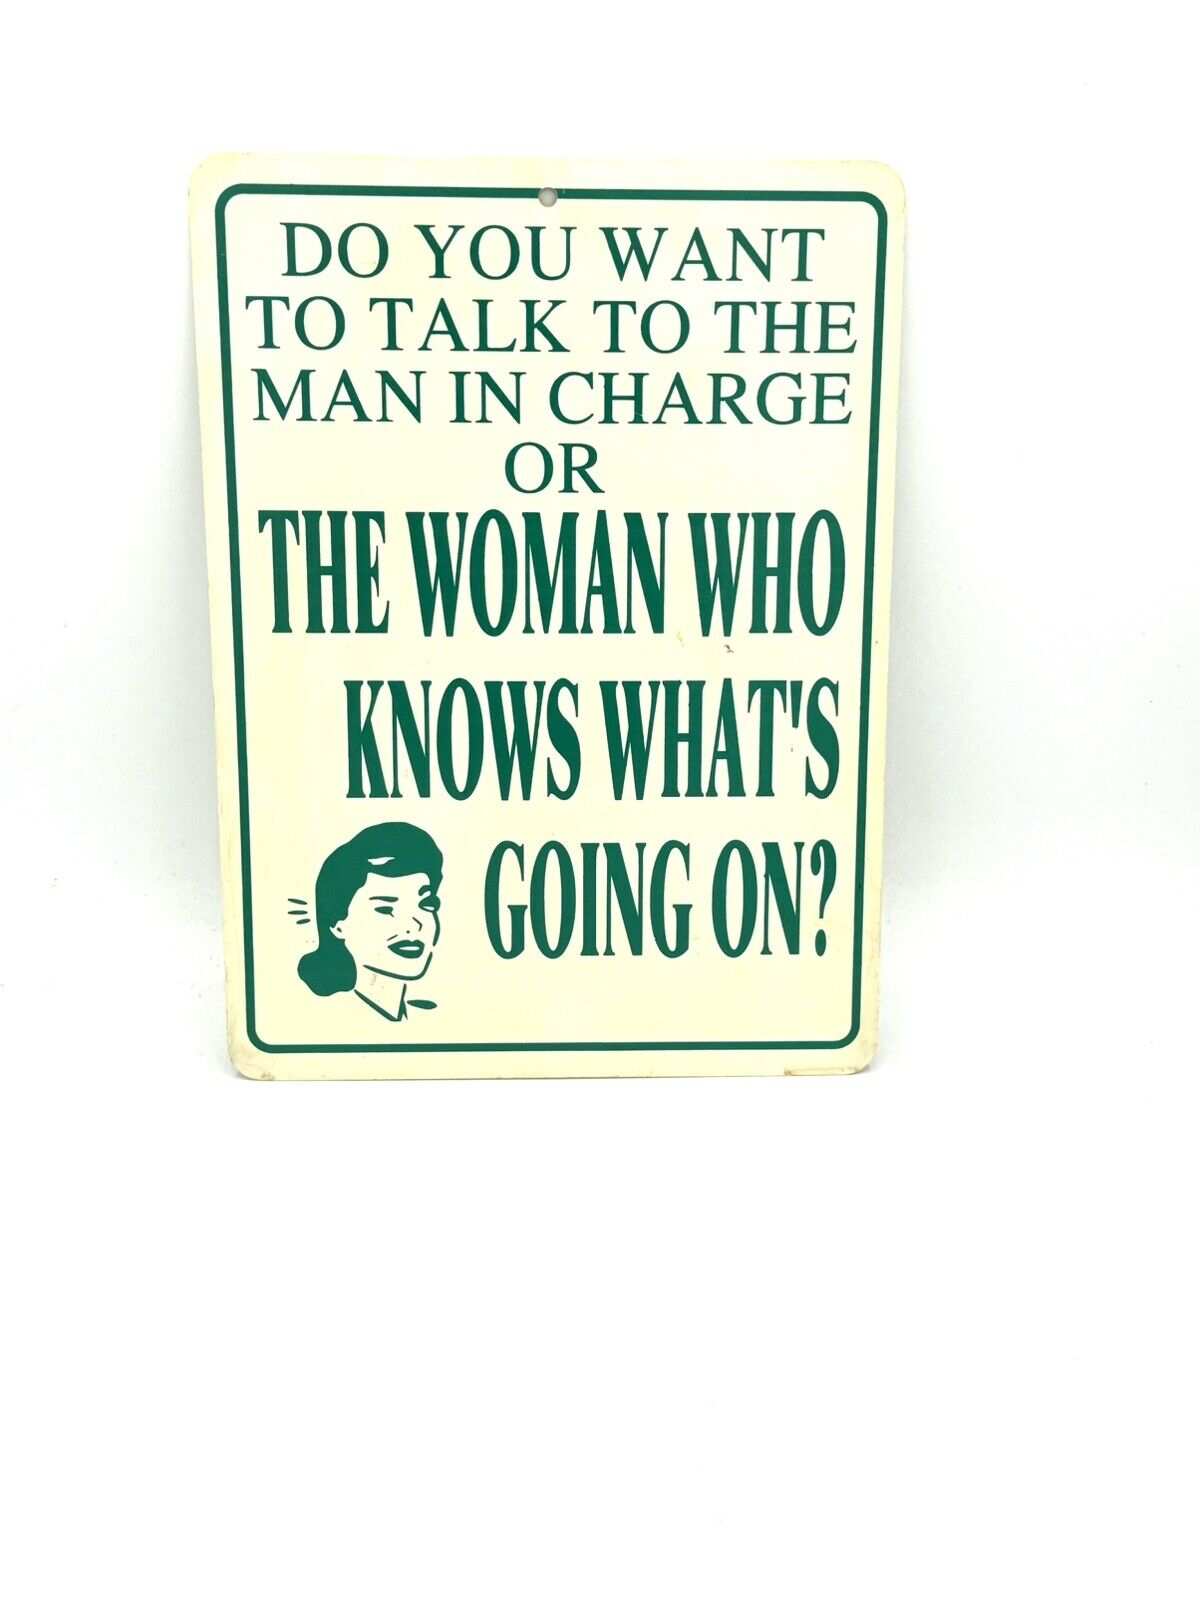 funny man cave sign plastic YOU WANT 2 TALK 2 MAN IN CHARGE?OR WOMAN KNOWS WHAT